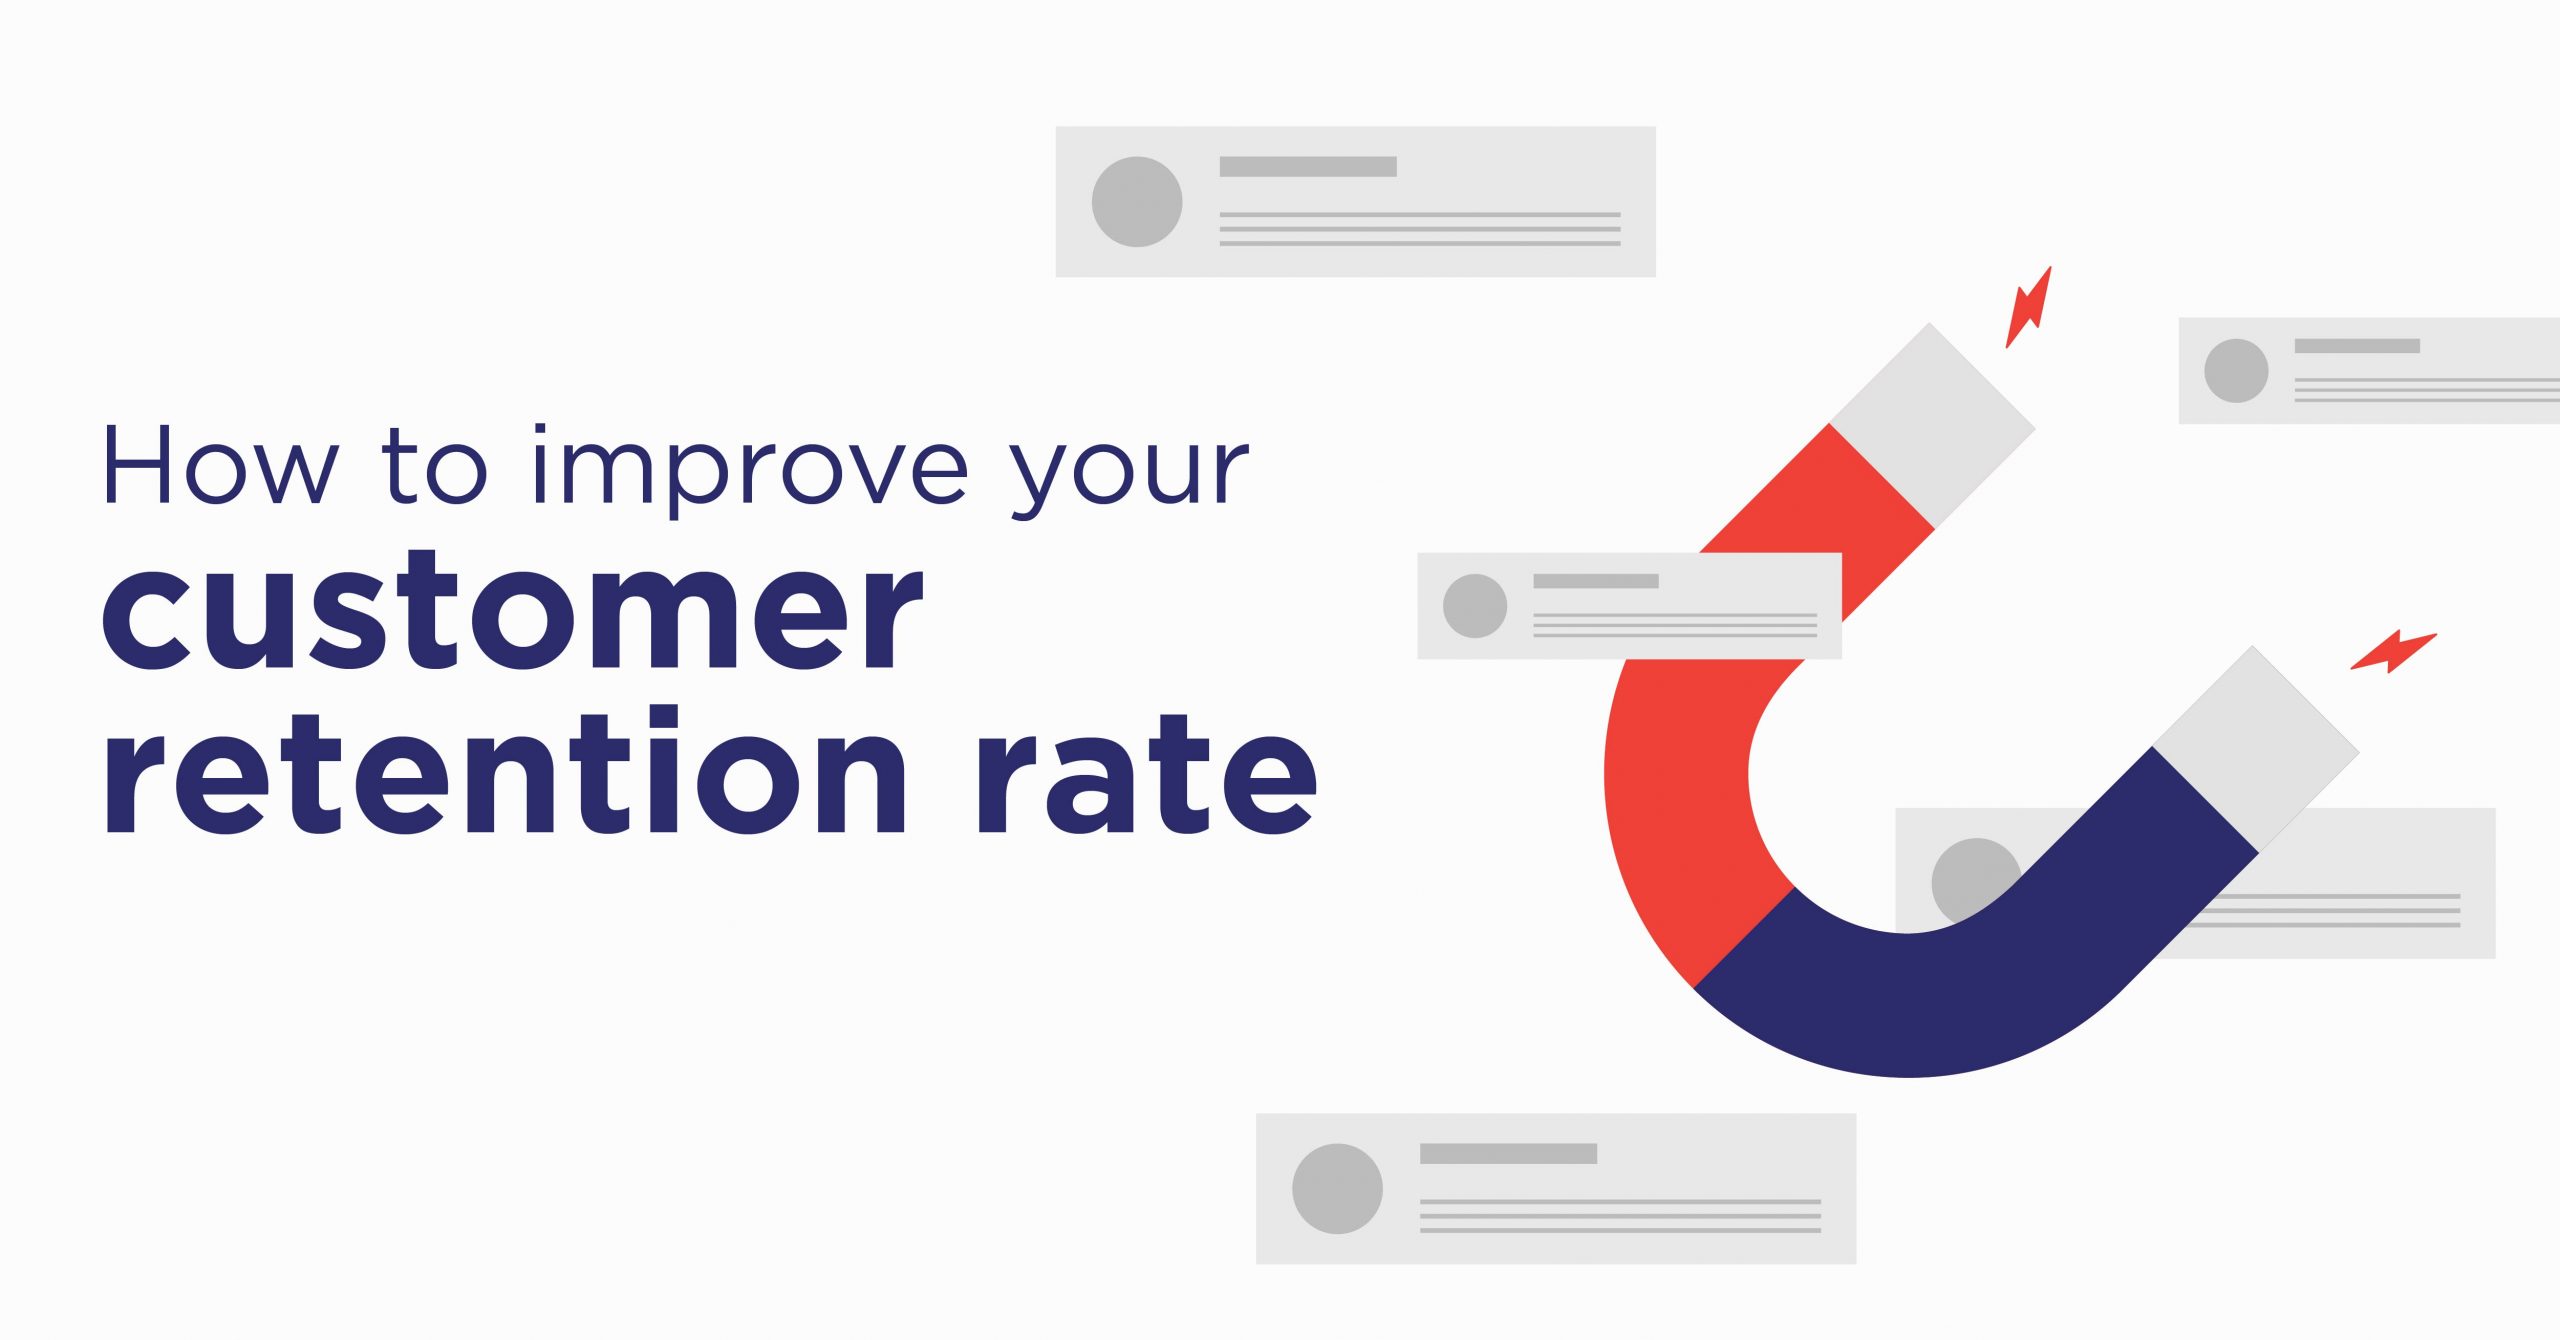 4 Effective Ways to Improve Customer Retention Rate in 2022